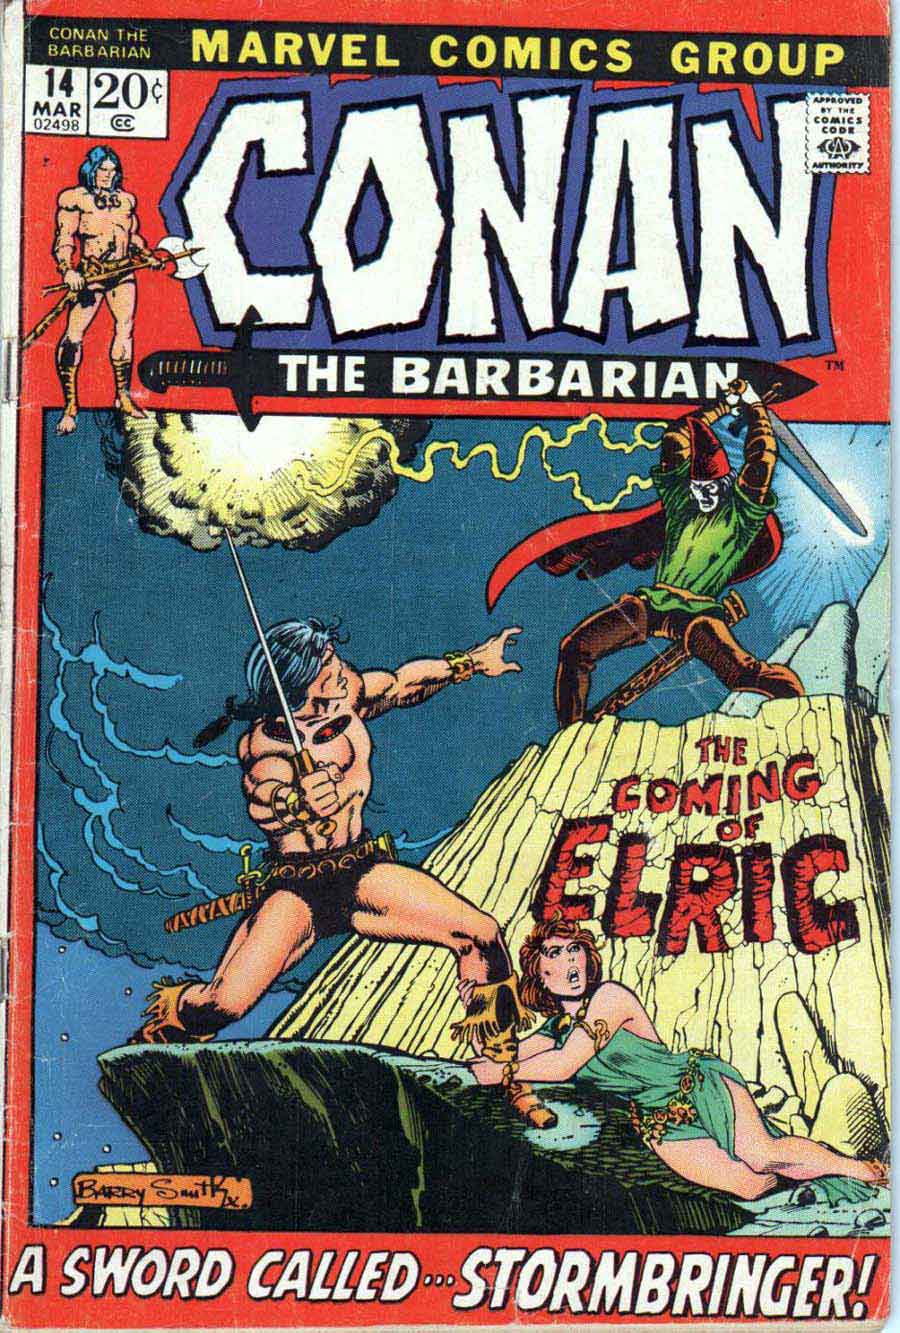 Conan the Barbarian v1 #14 marvel comic book cover art by Barry Windsor Smith